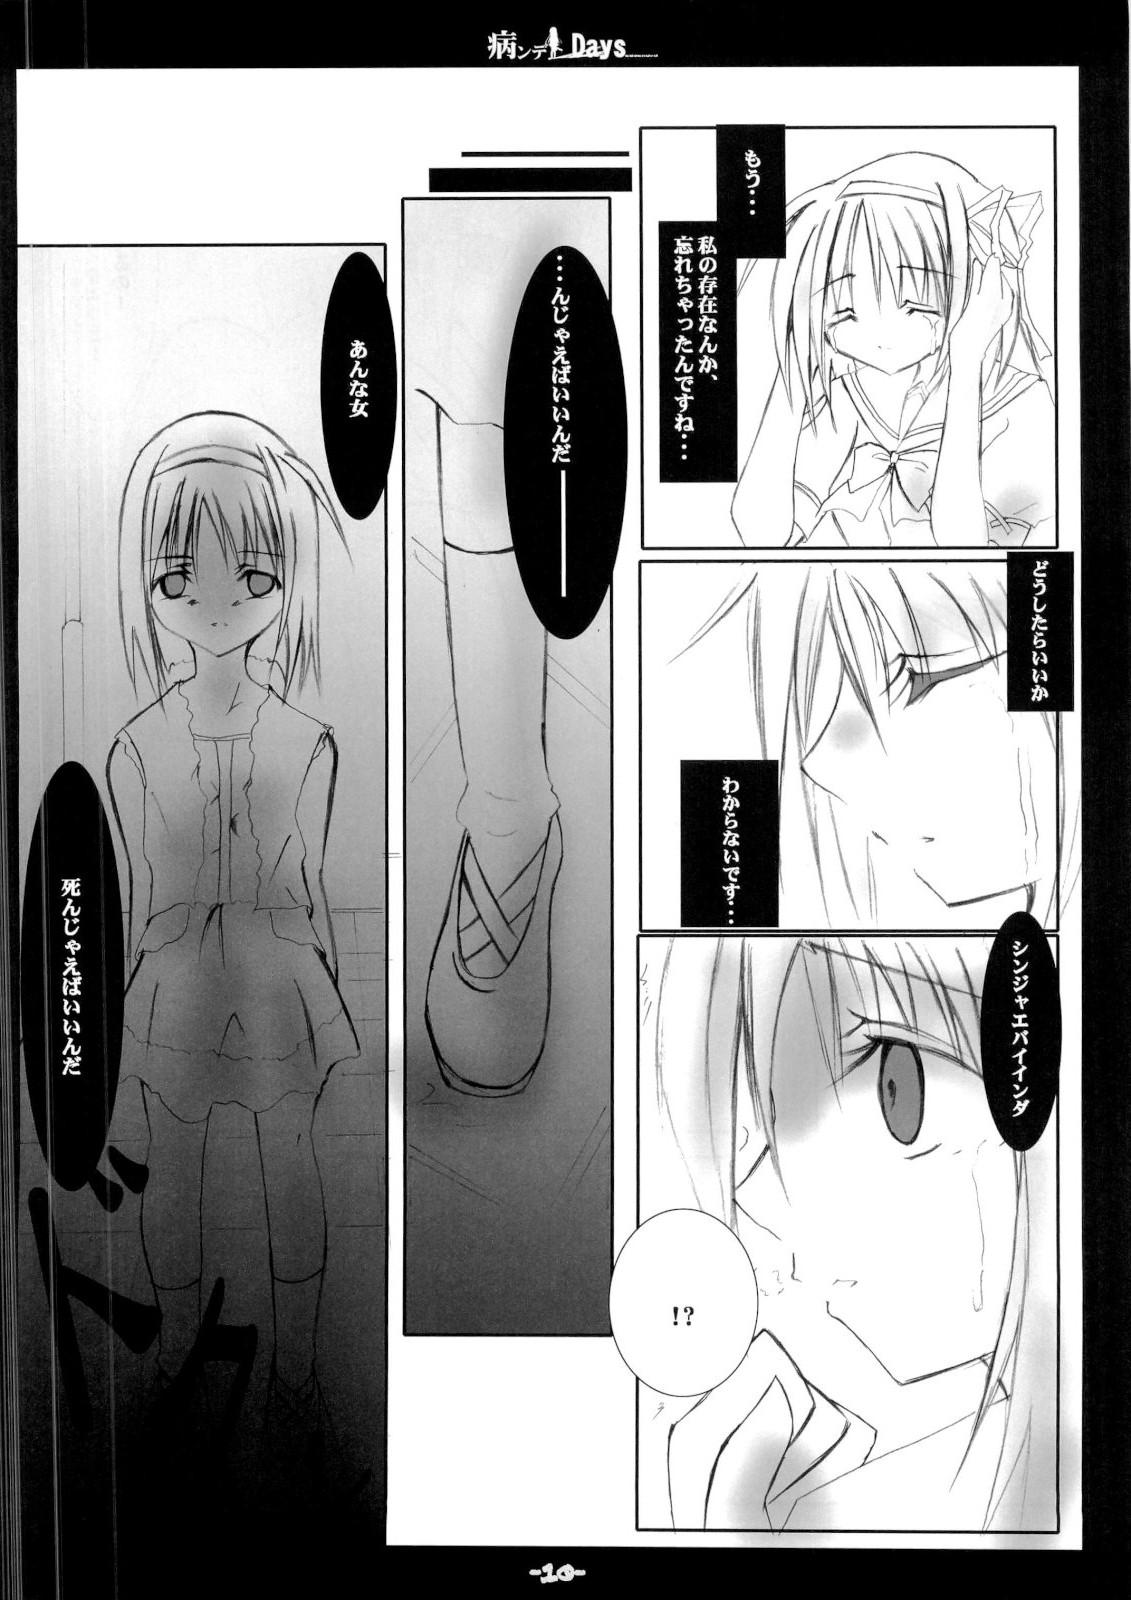 Group Yandere Days - School days Shuffle Brother - Page 9